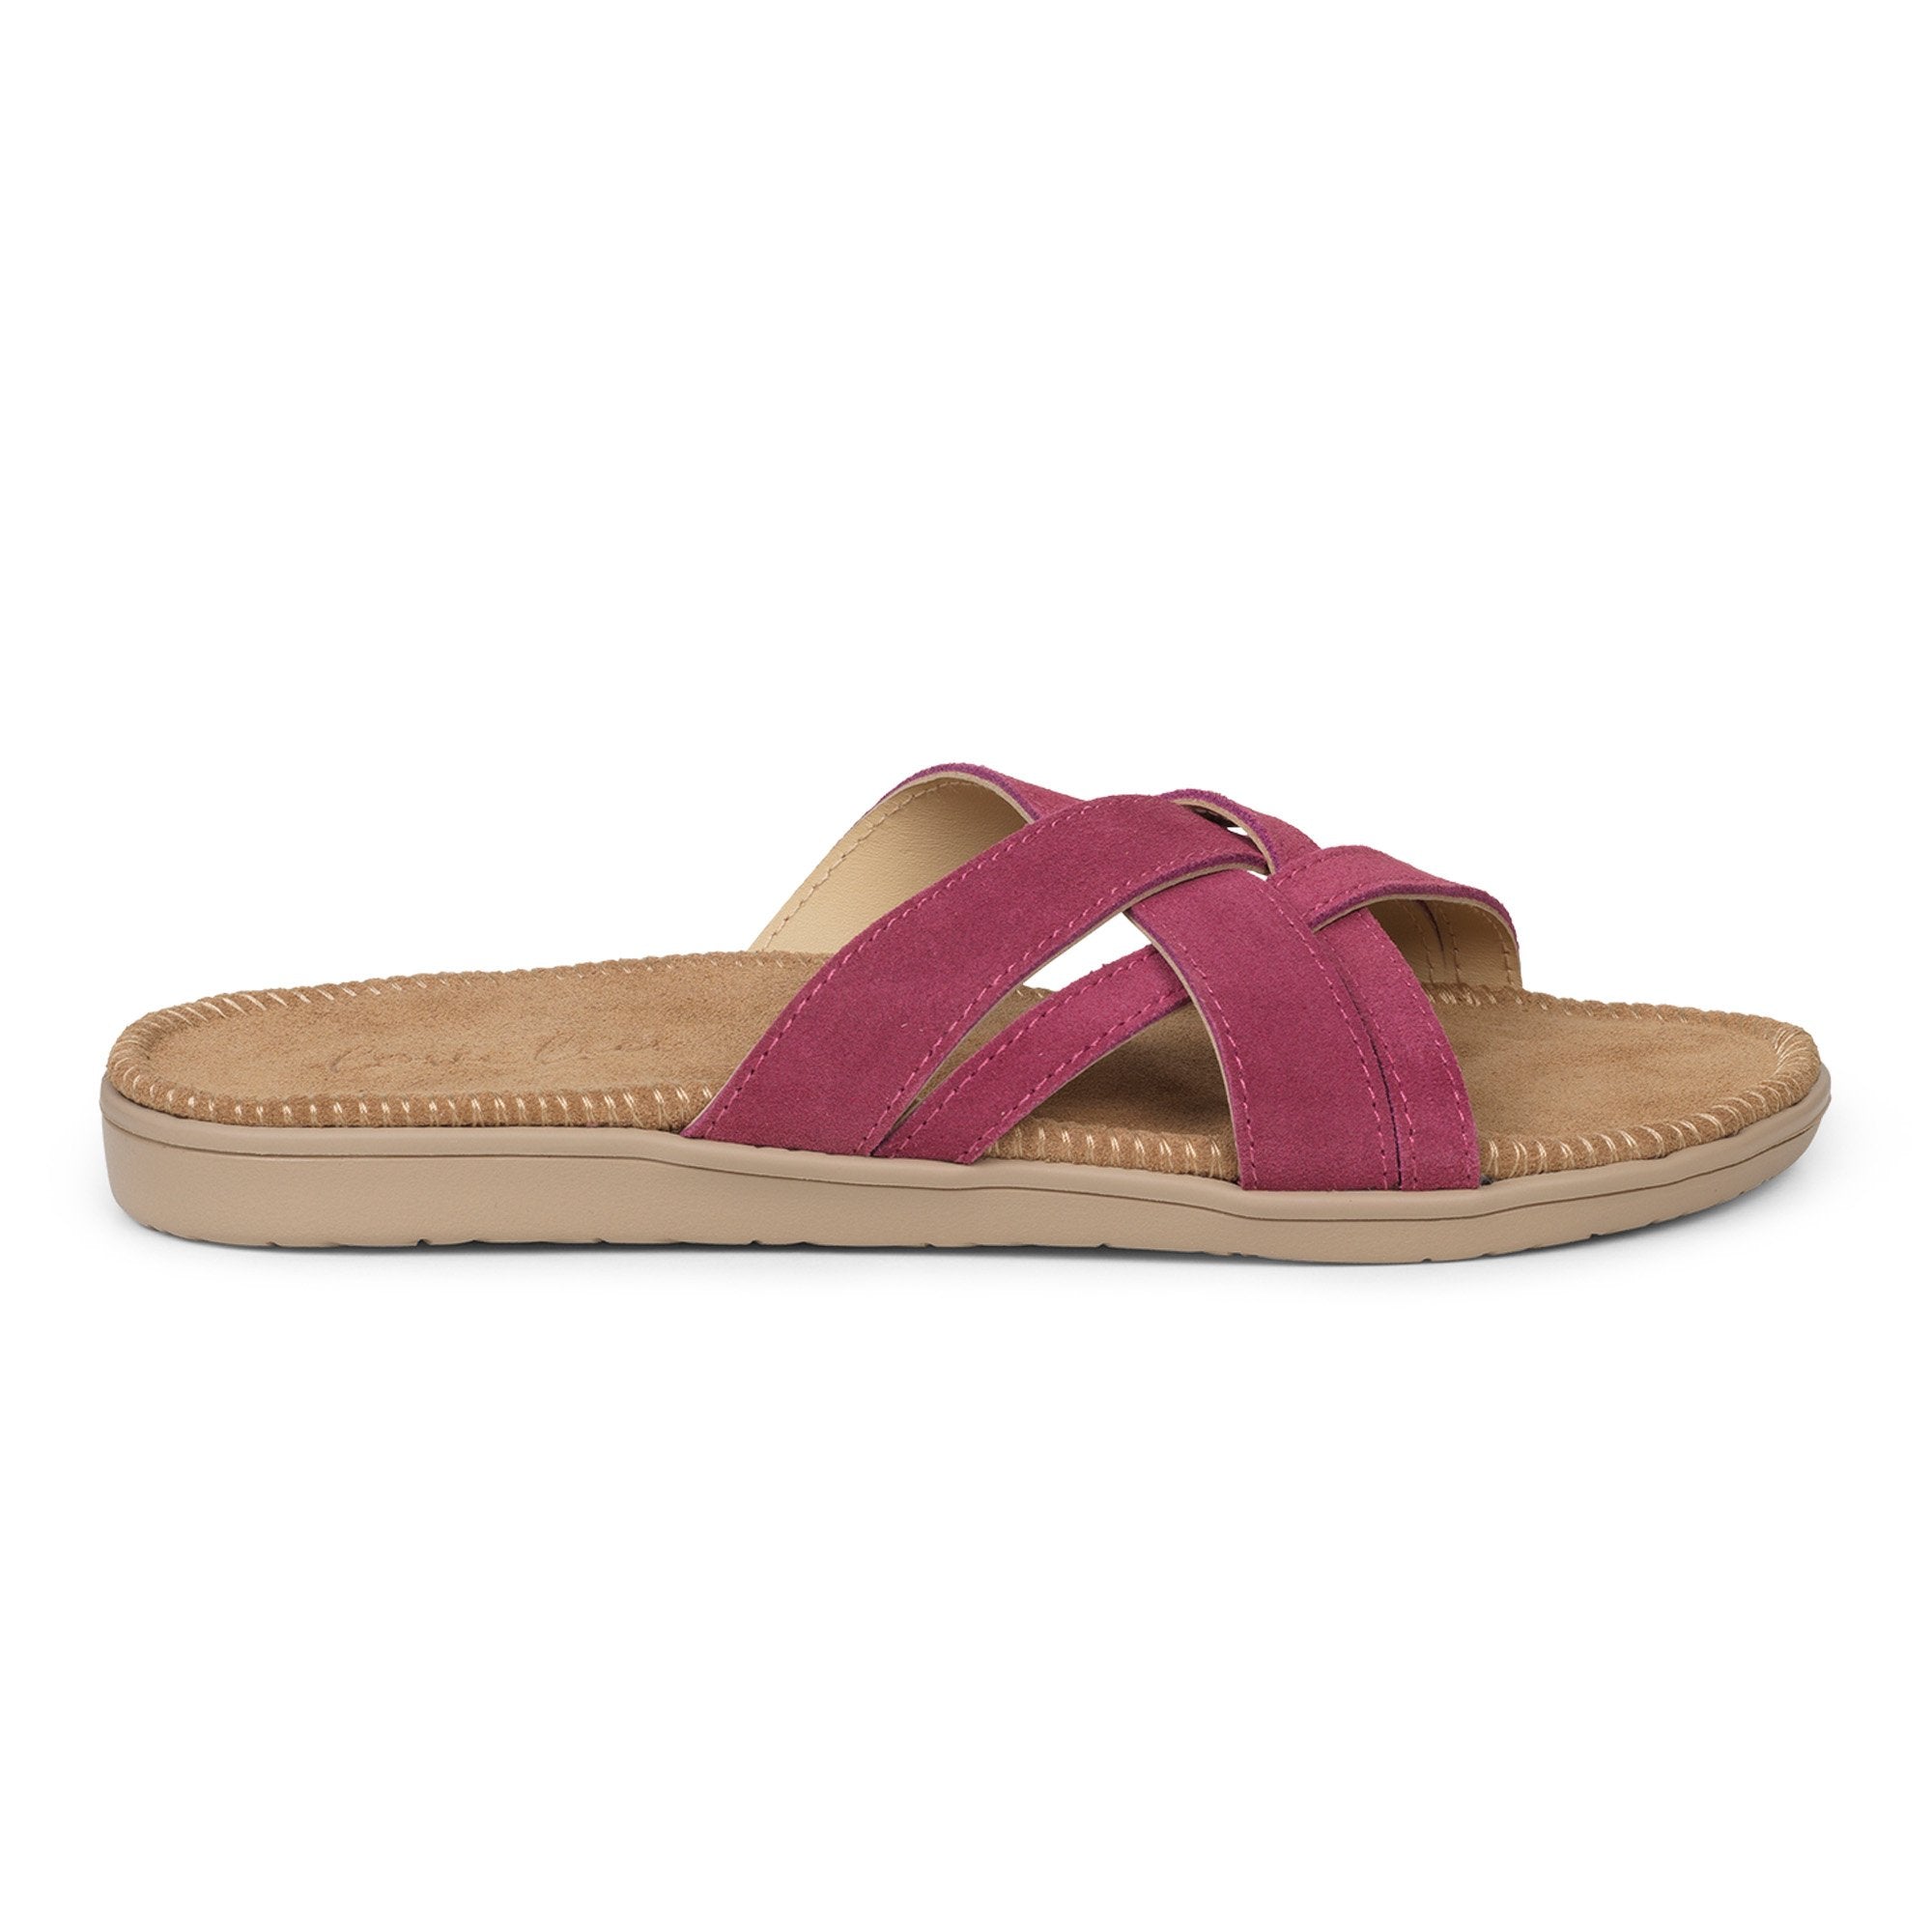 Sandals with 4 crossing straps of soft suede. The comfortable inner sole in covered with soft suede.